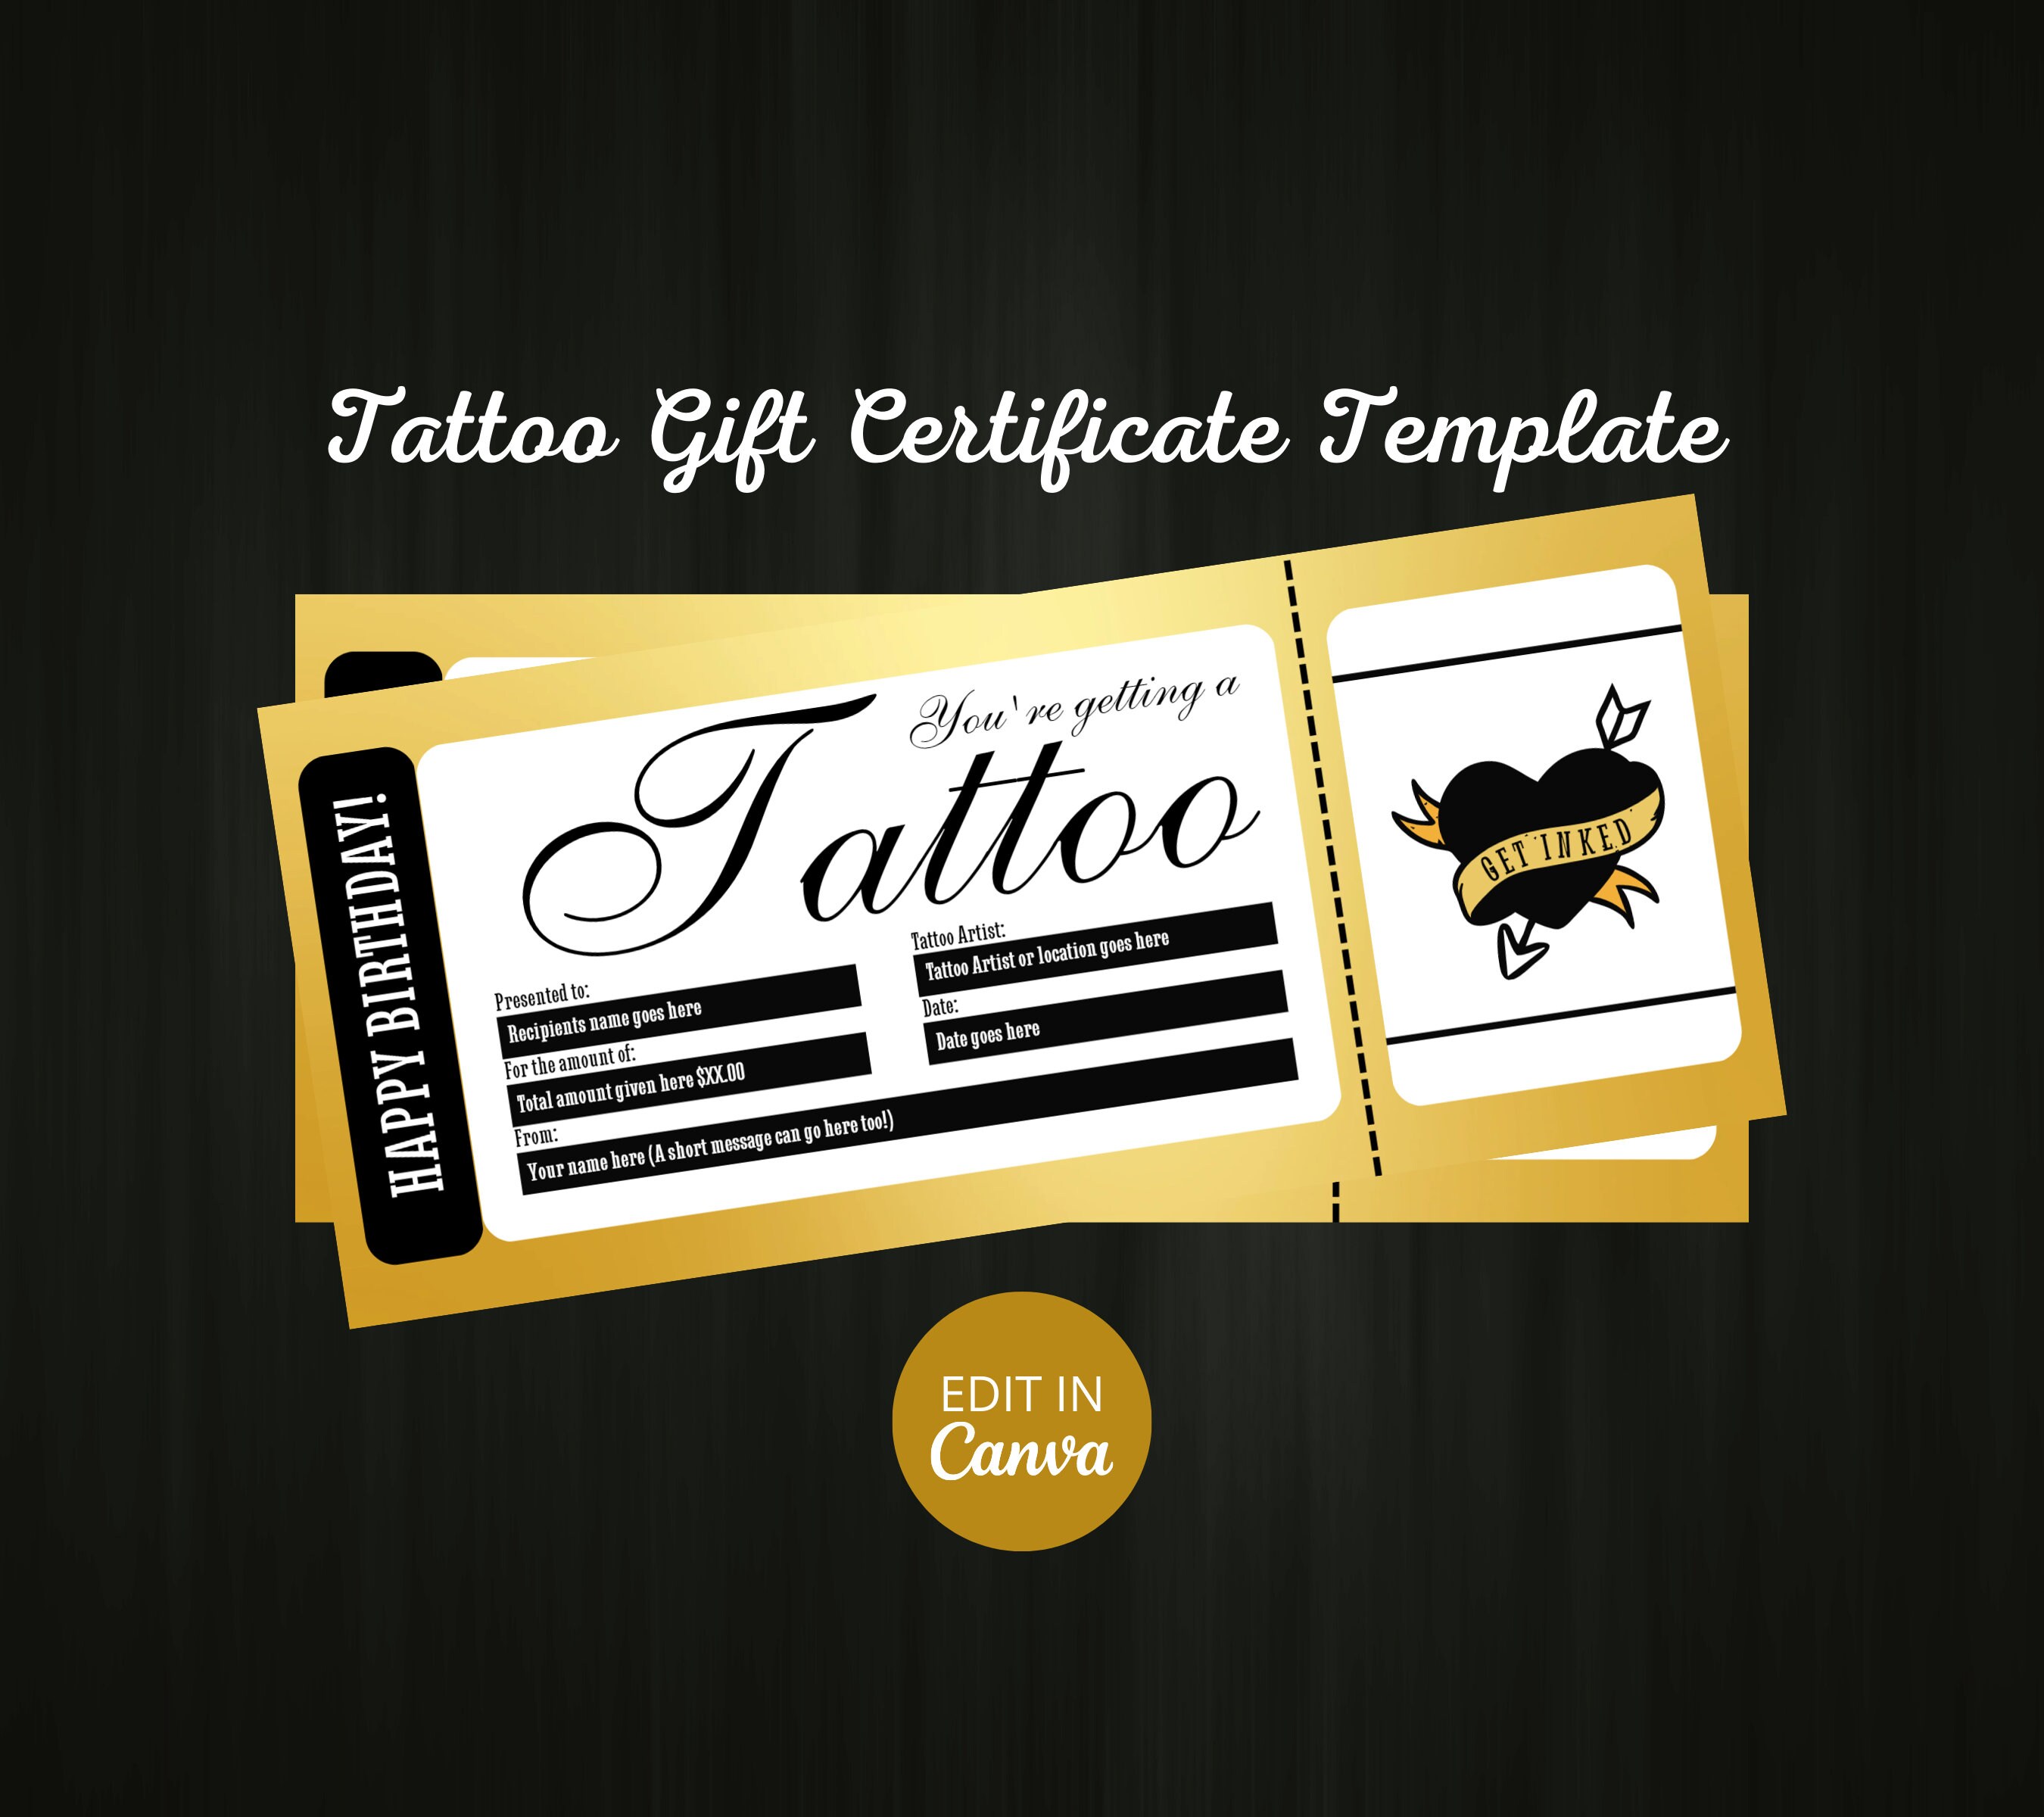 Mercy Seat Tattoo Company Gift Card Gift Certificate Tattoos Shop Studio  Vancouver Island Shops — Mercy Seat Tattoo Company